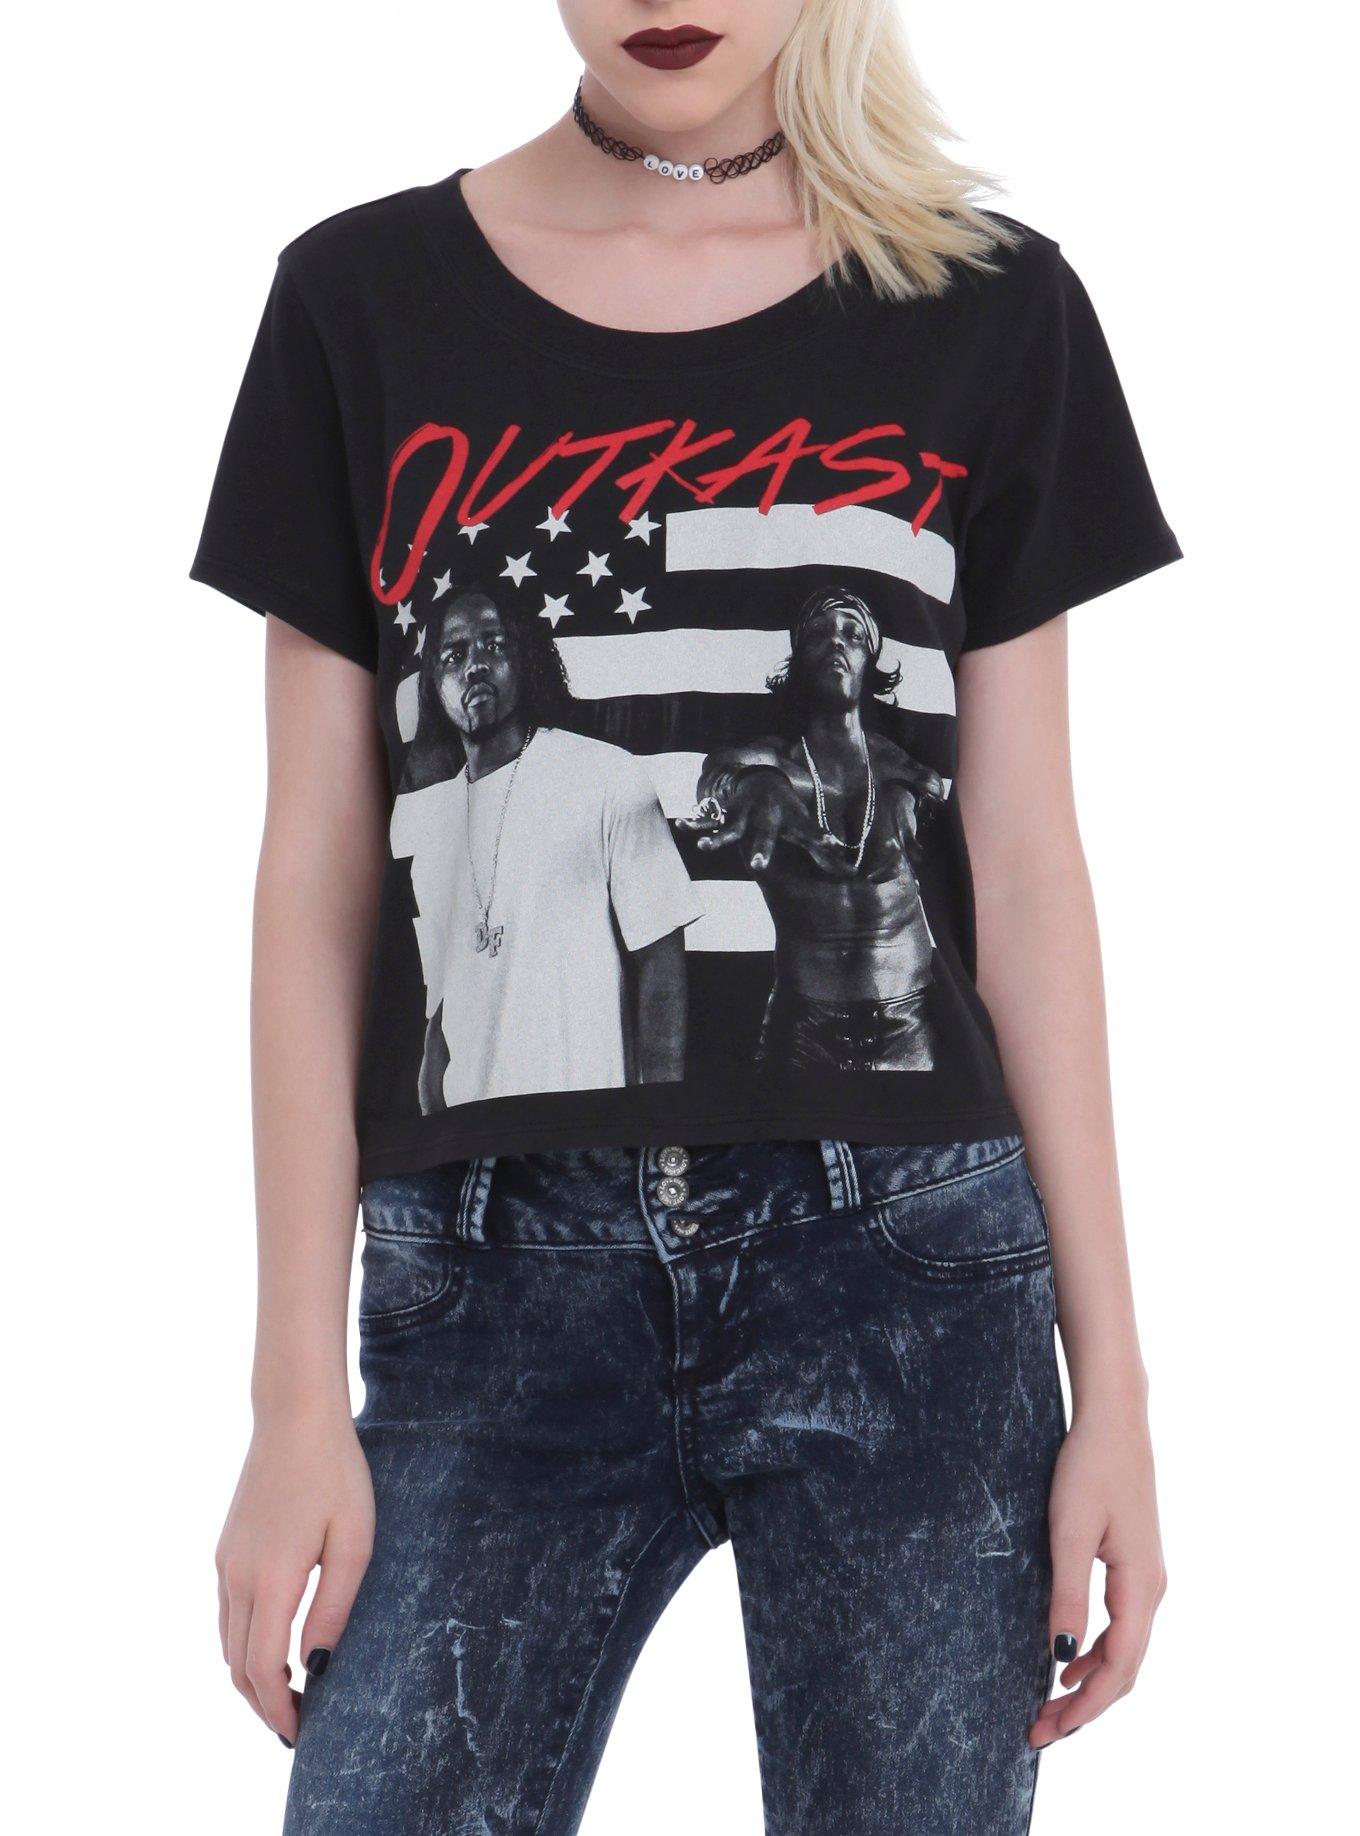 Outkast Flag Girls Crop Top | Hot Topic